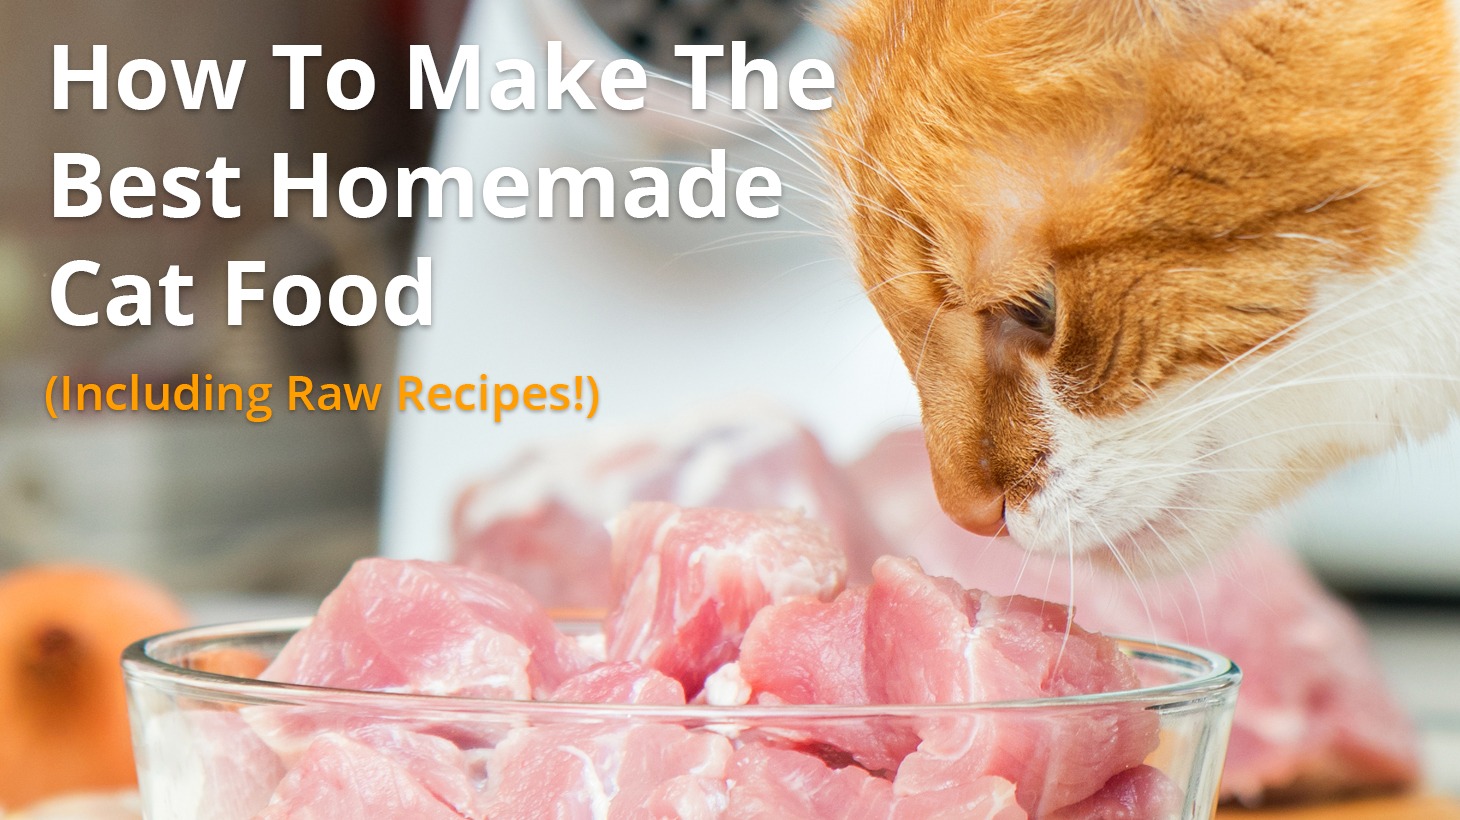 Best Homemade Cat Food Recipes | Raw or Cooked, Make Your Own!